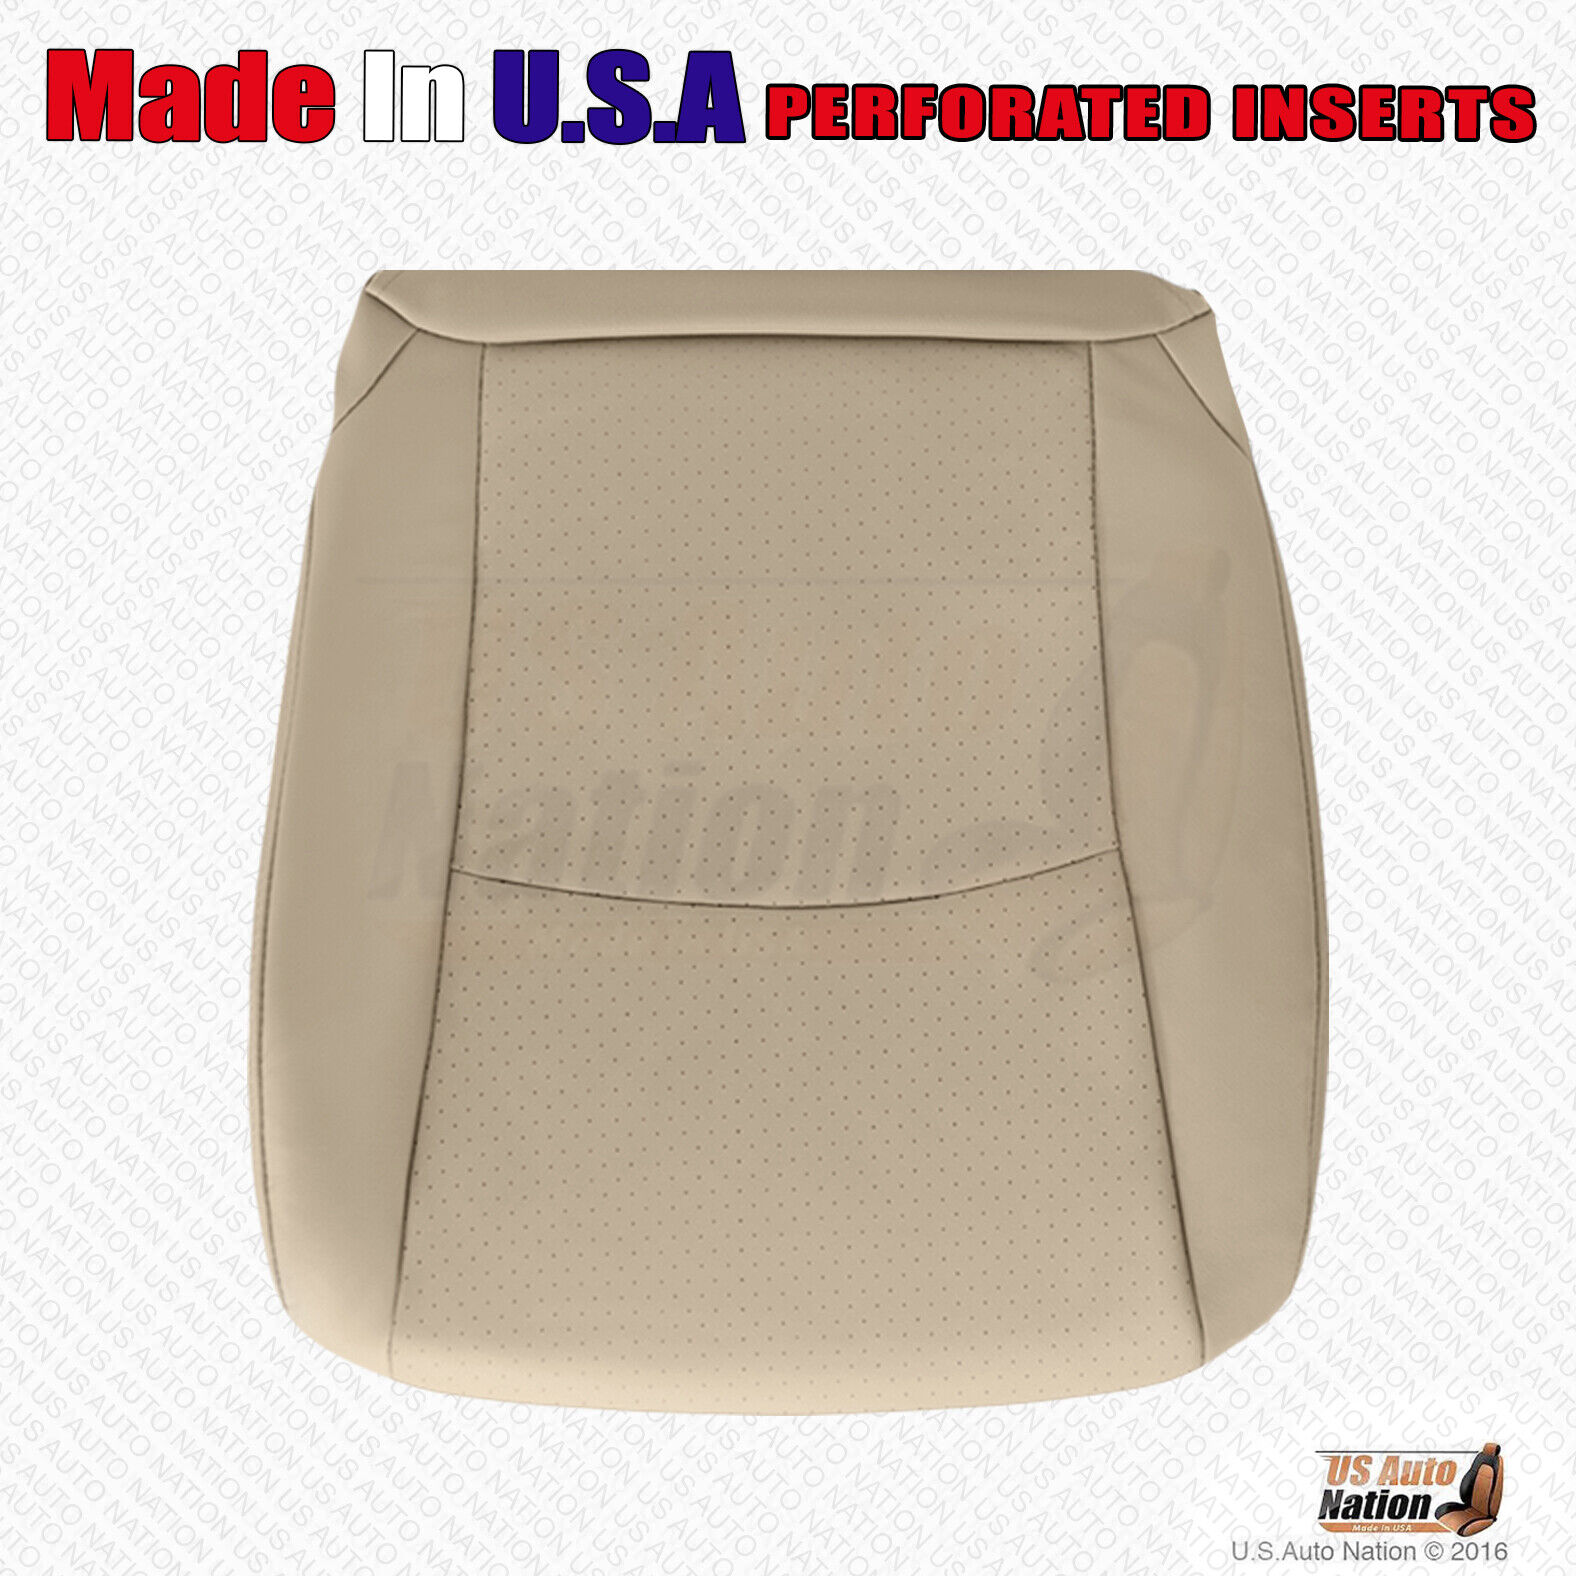 2008 - 2013 Fits Toyota Highlander Driver Passenger Perforated Leather Cover Tan